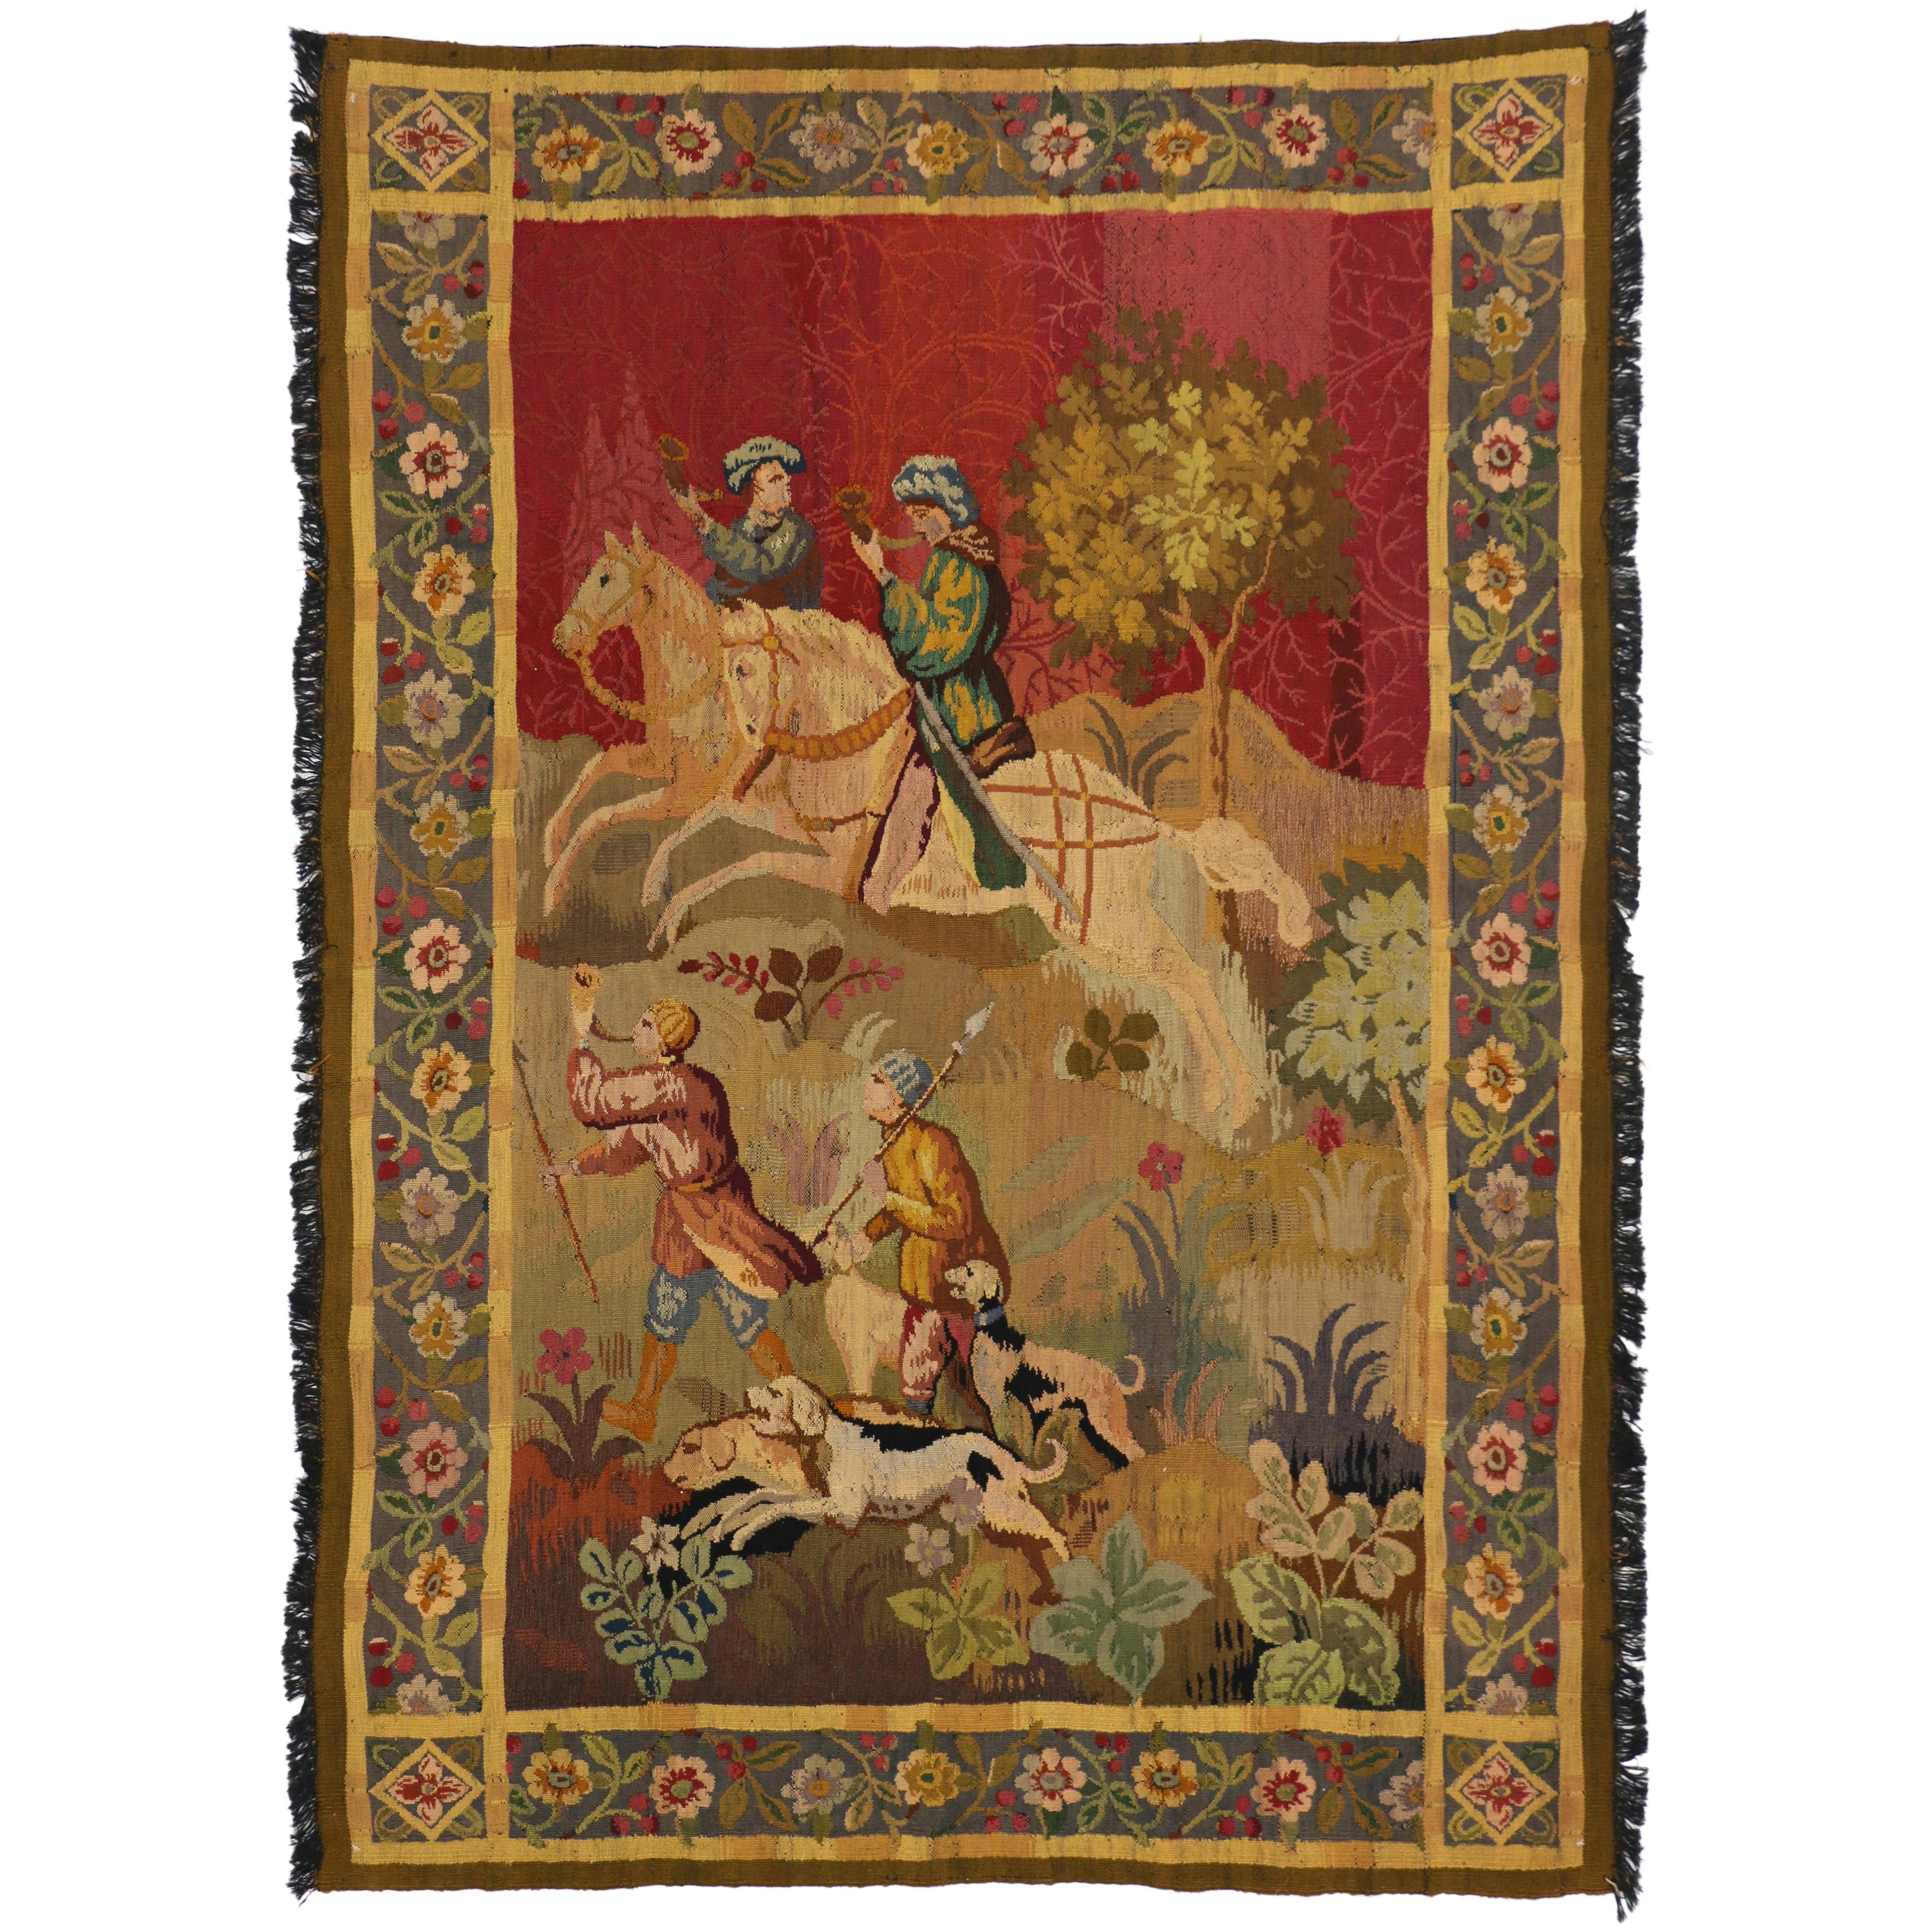 Late 19th Century Antique Tapestry with Rococo Medieval Style